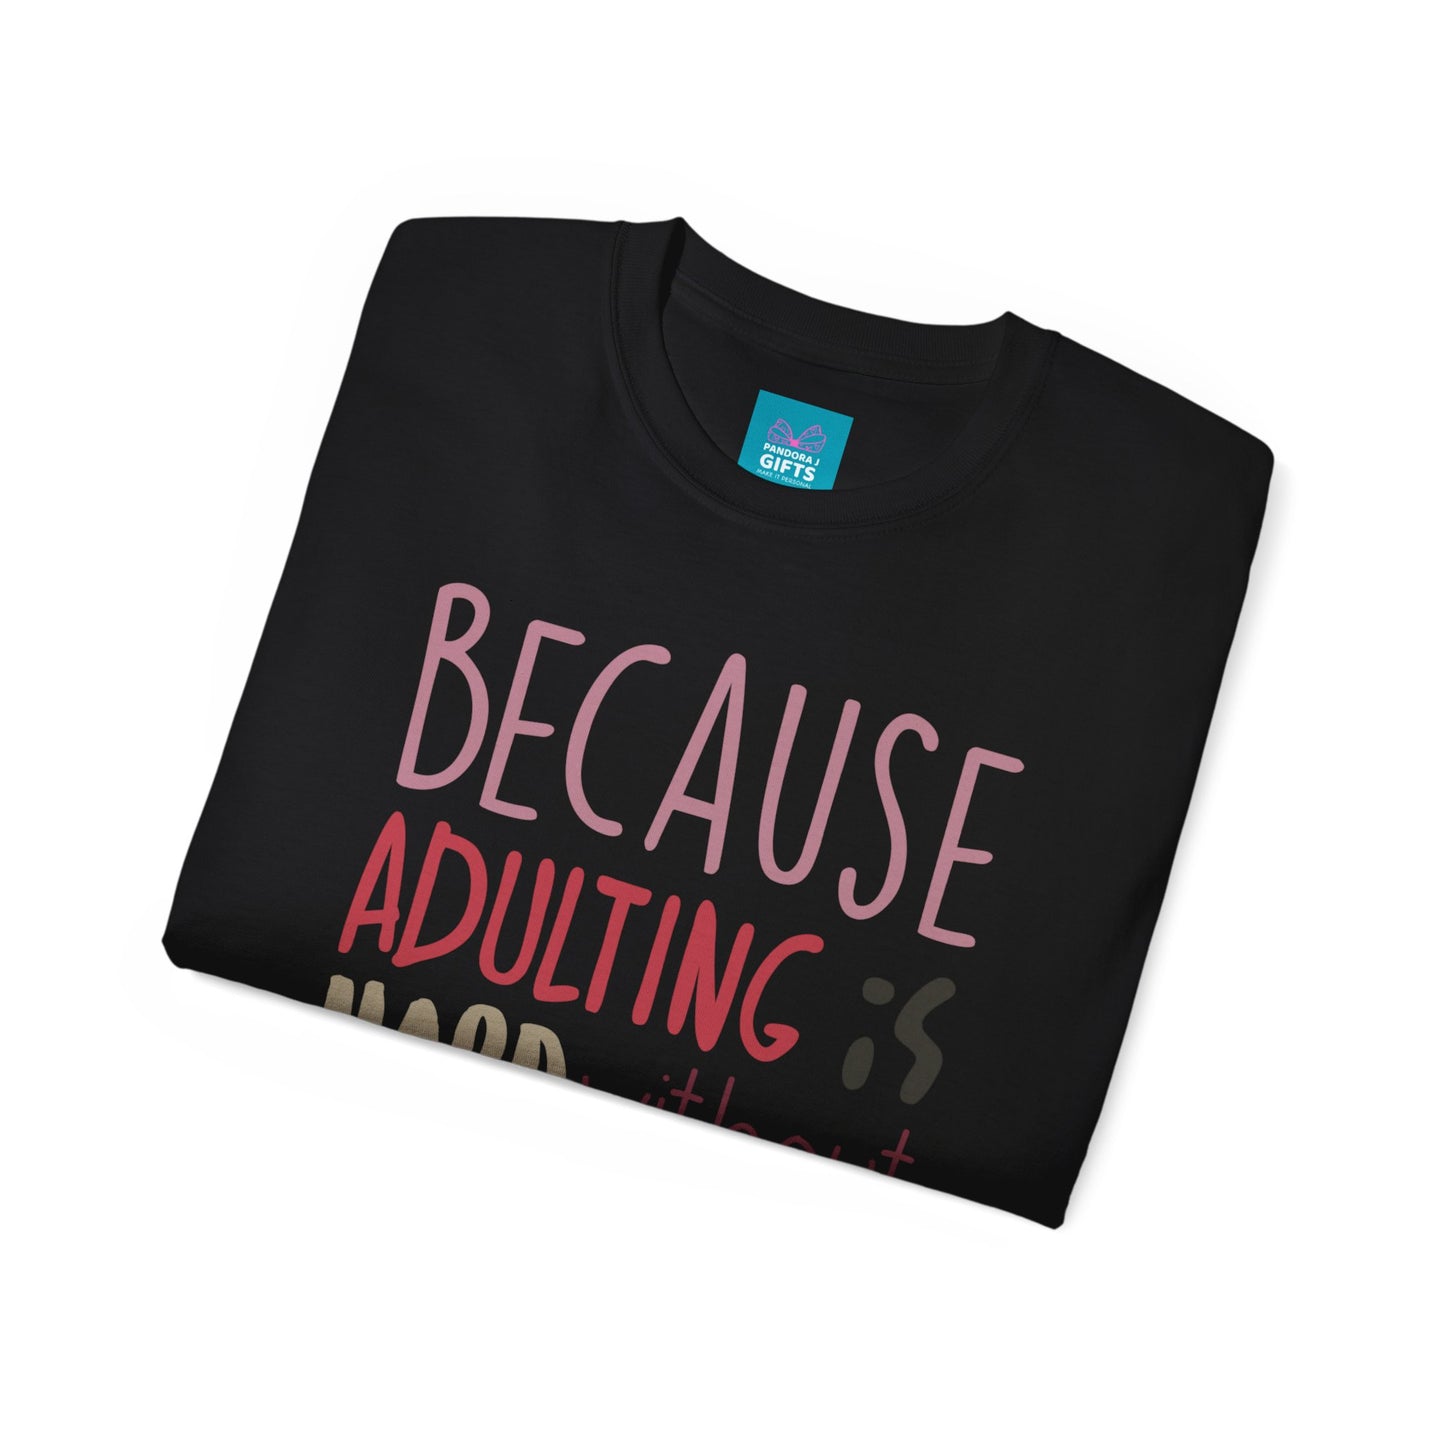 black shirt with words "Because Adulting is Hard without Jesus"